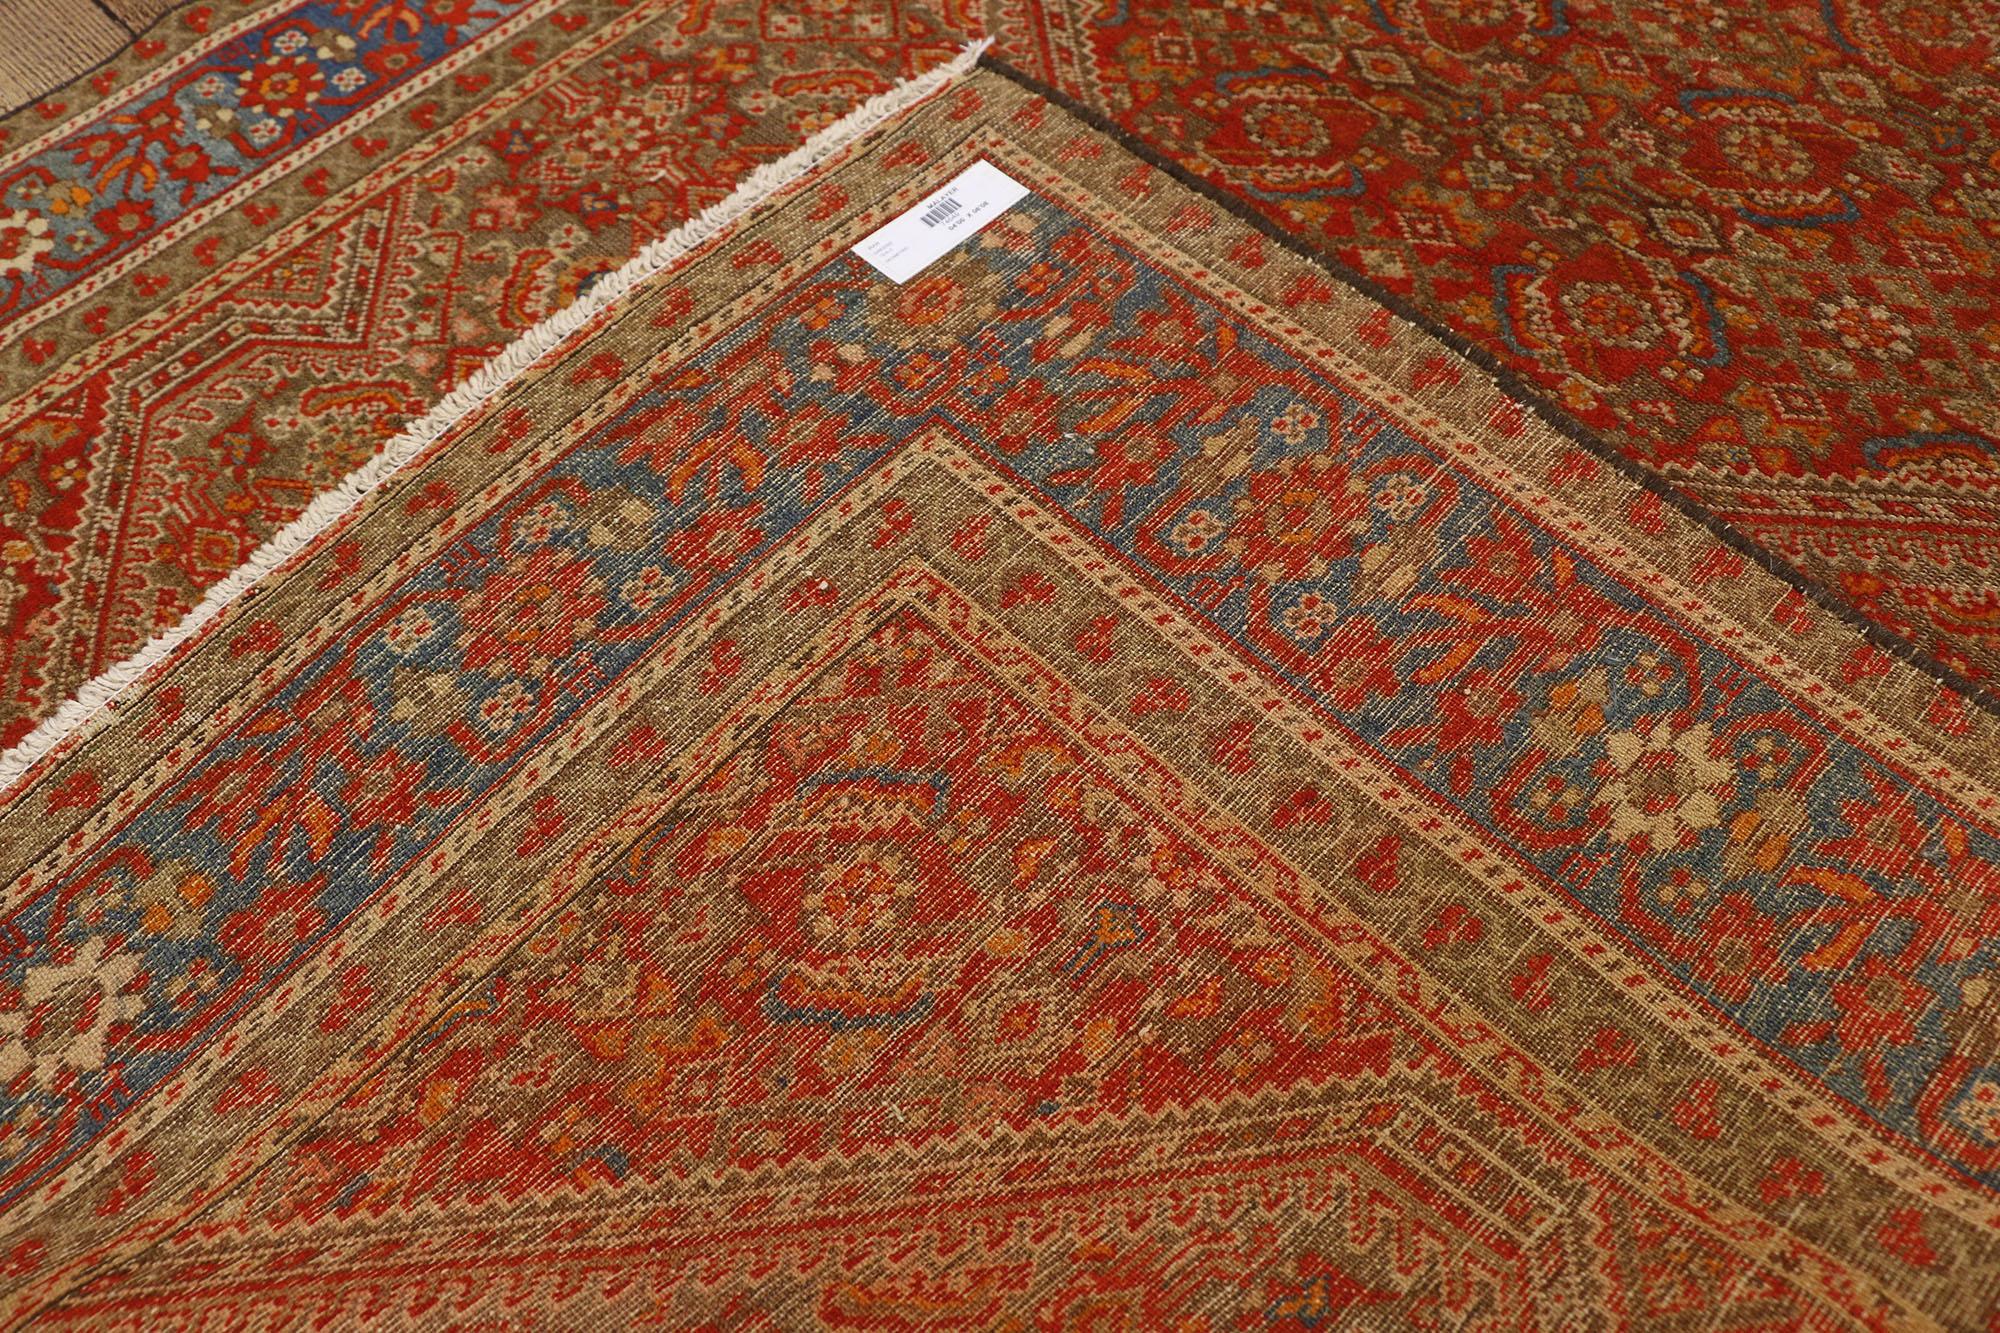 19th Century Antique Persian Mishan Malayer Rug with Northwestern Arts & Crafts Style For Sale